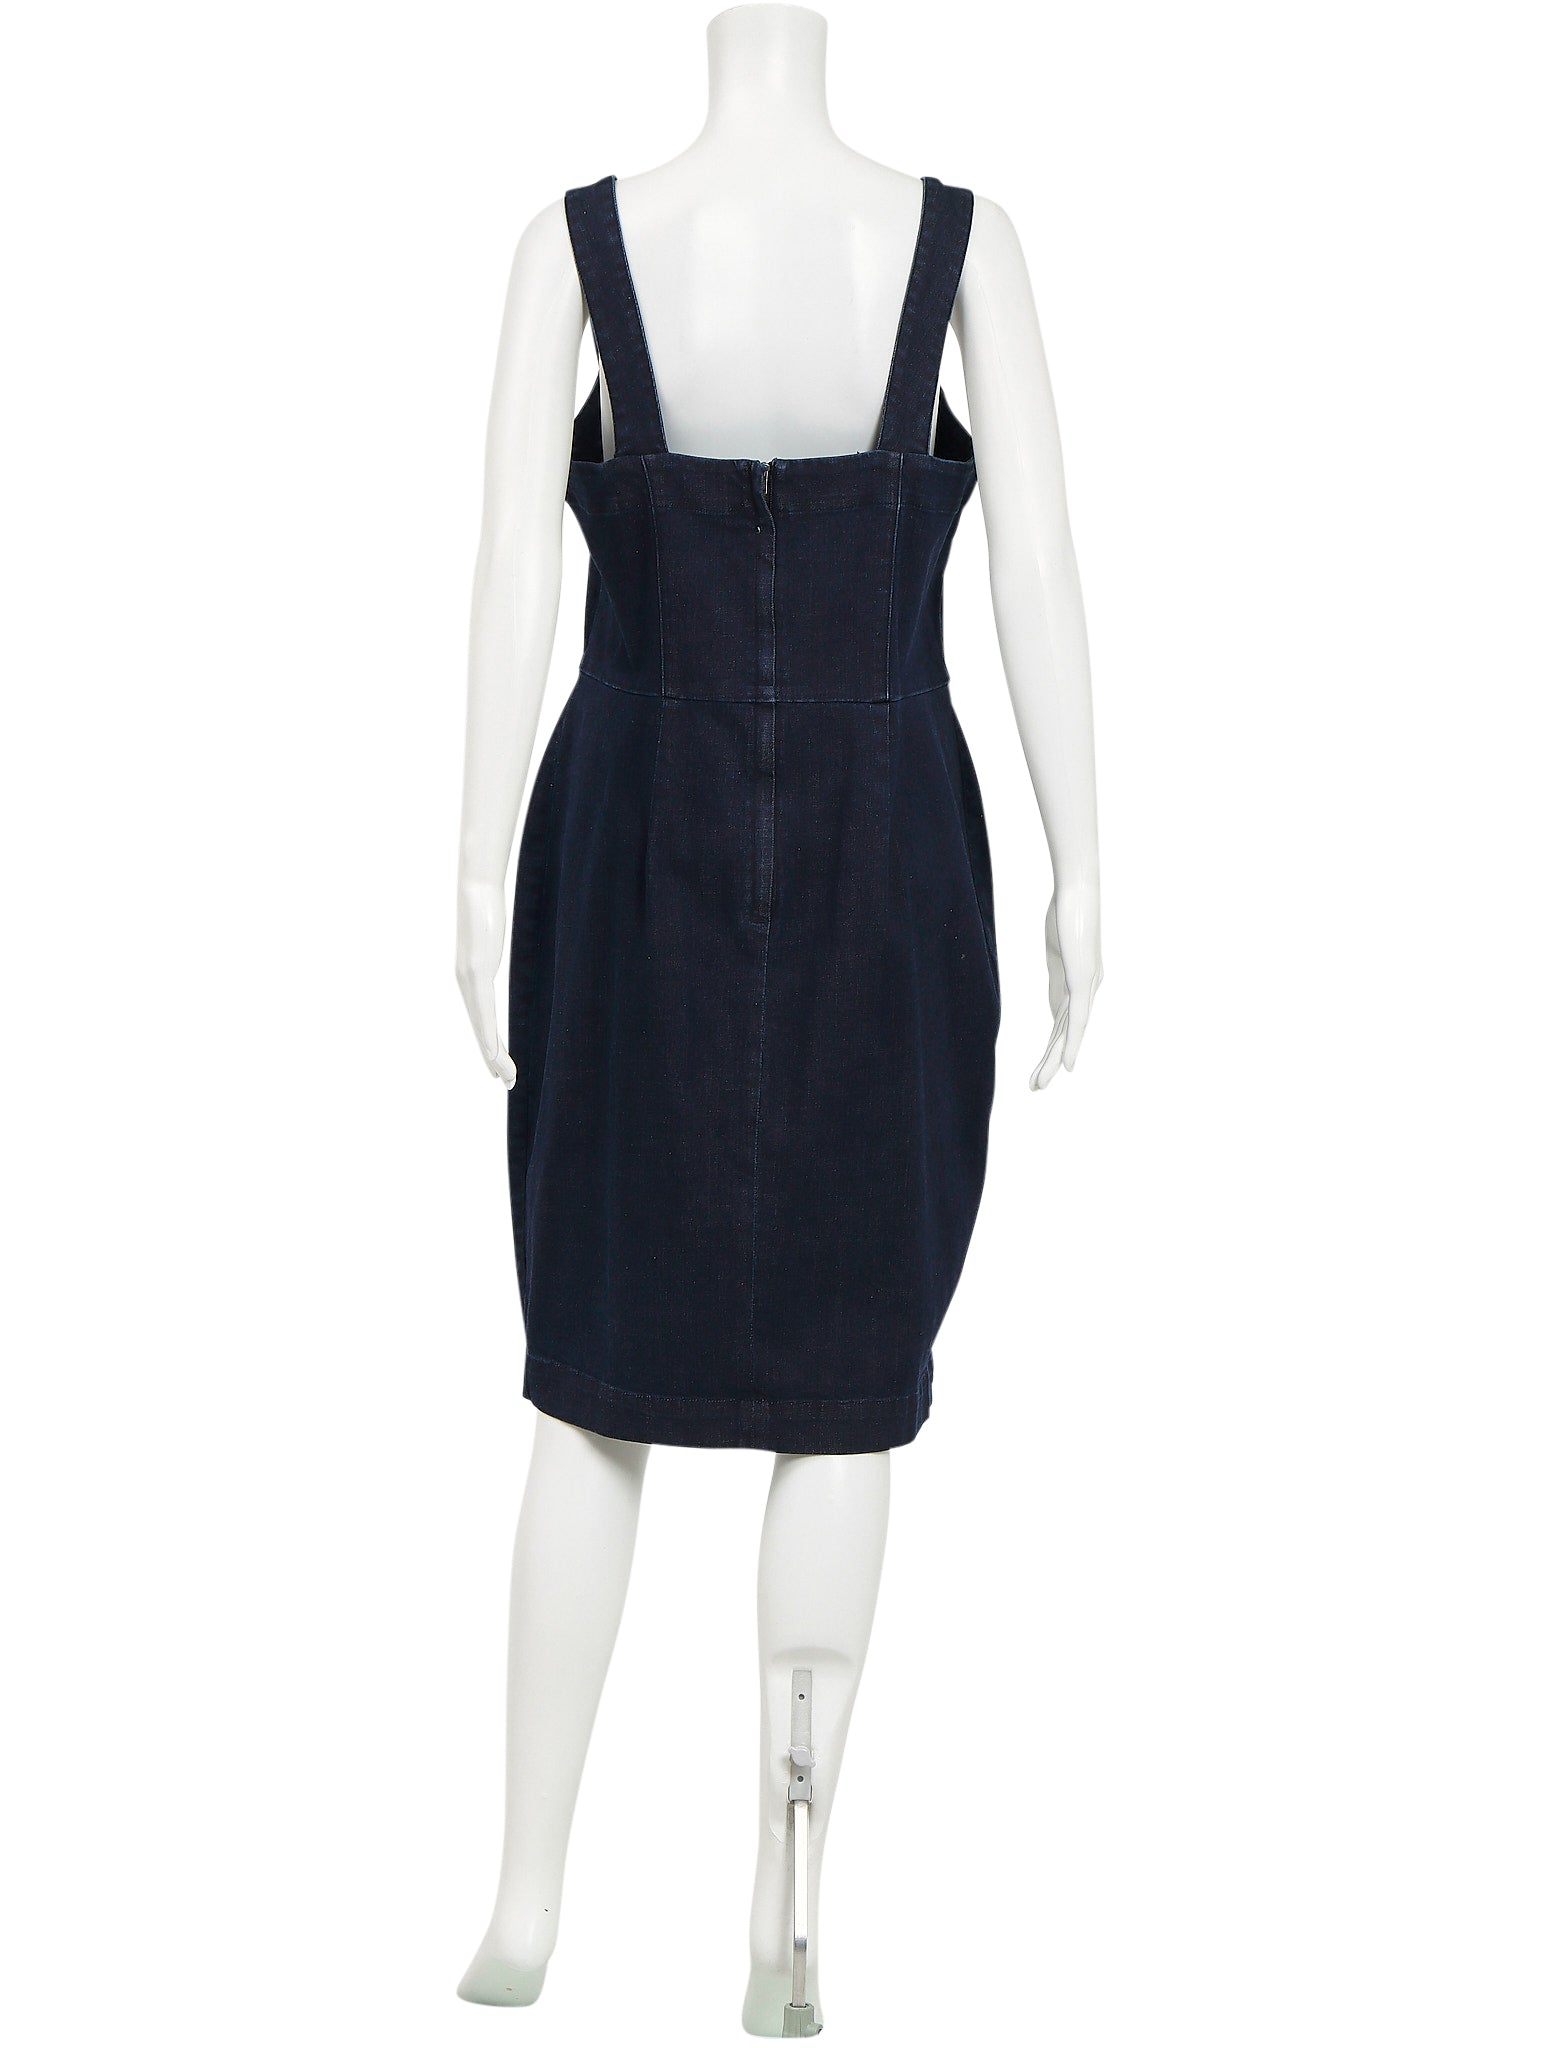 Country Road Denim Pinafore Dress – The Turn